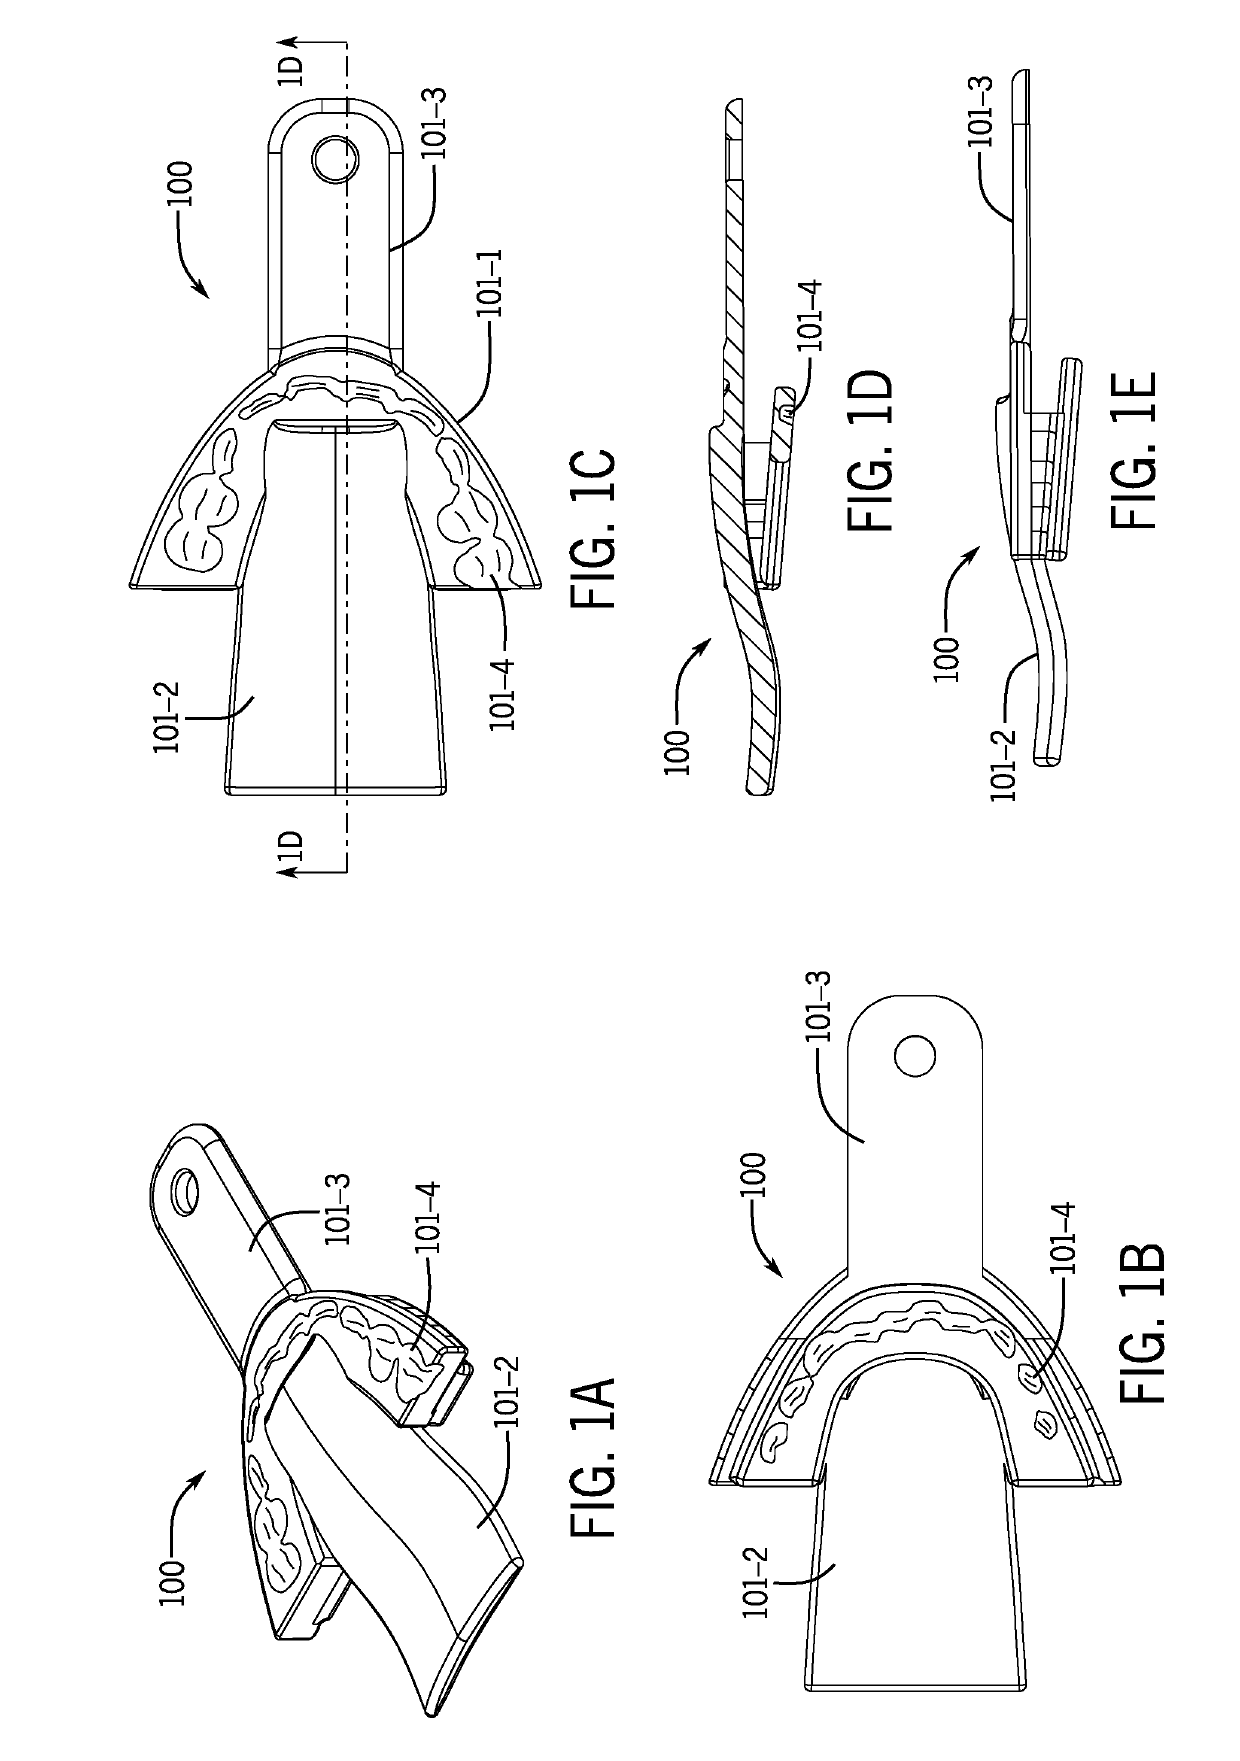 Open bite registration device for use in making a customized intraoral device for radiation treatment